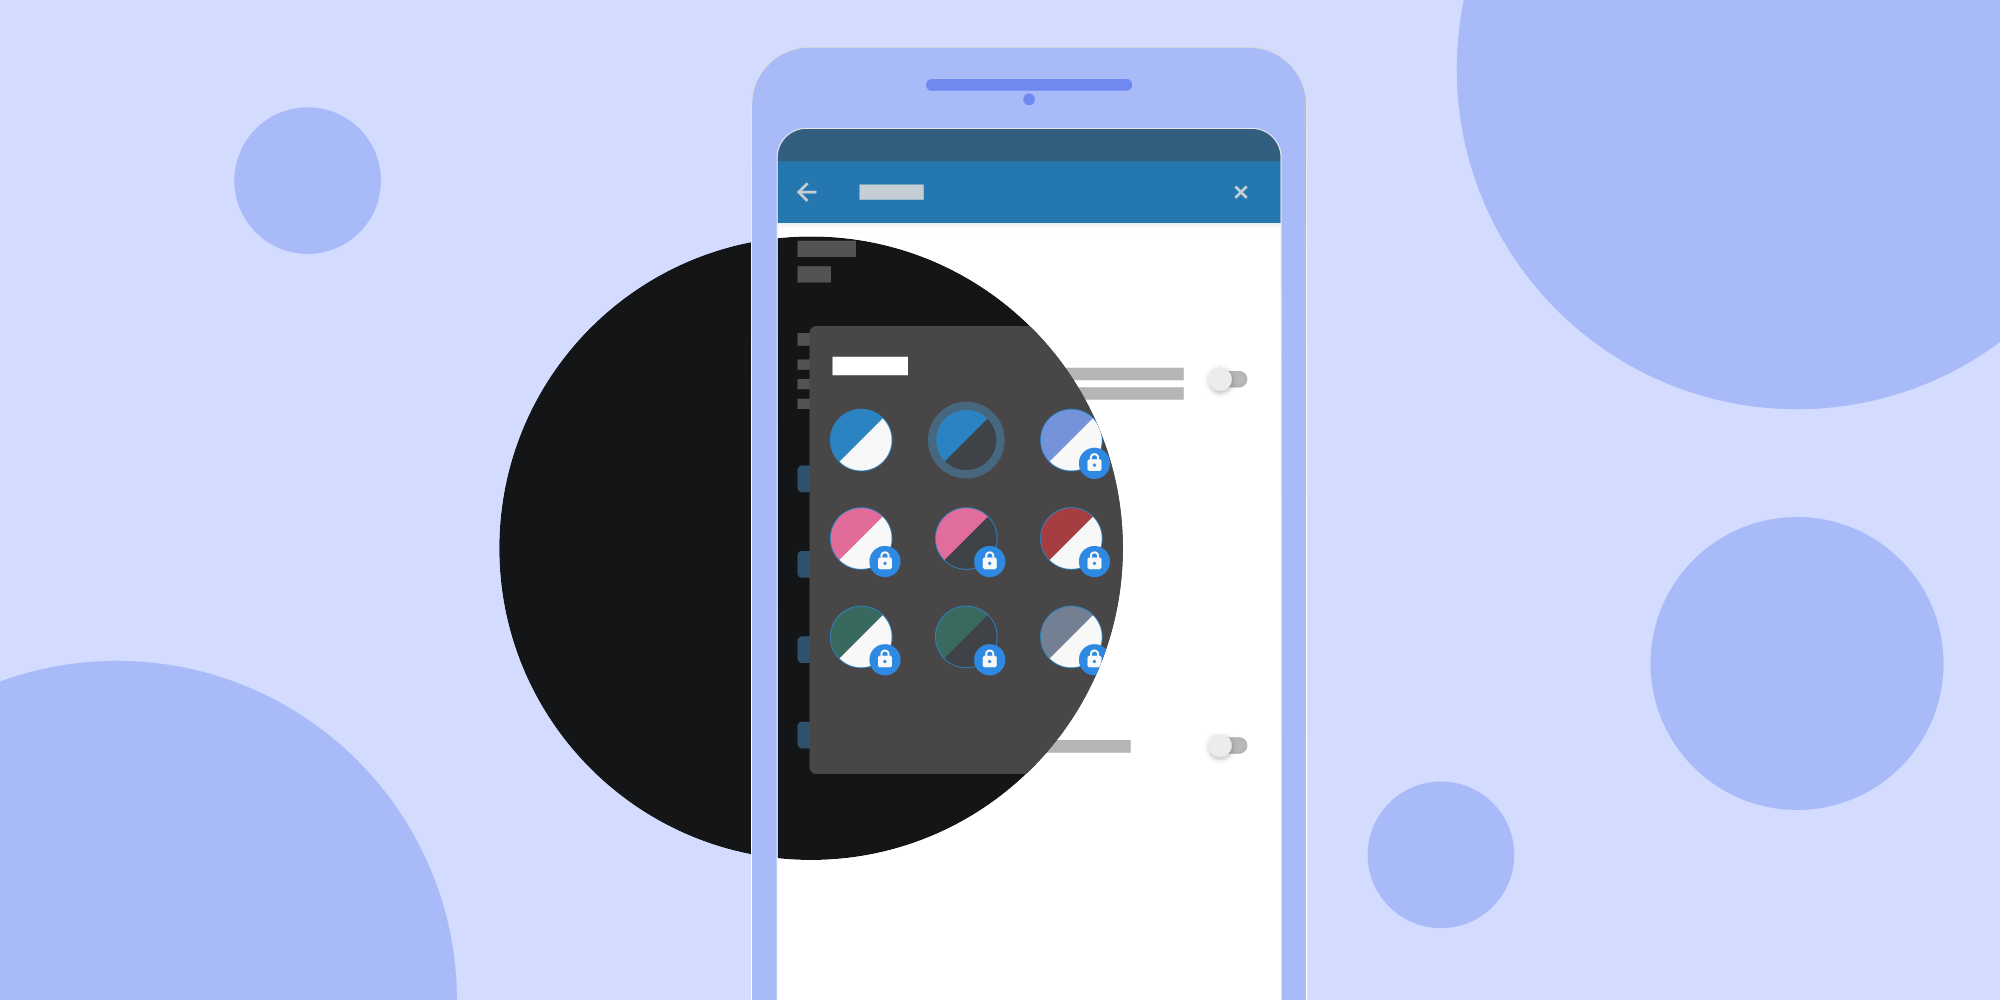 Illustration: Change Android Themes Instantly Using the Circular Reveal Animation